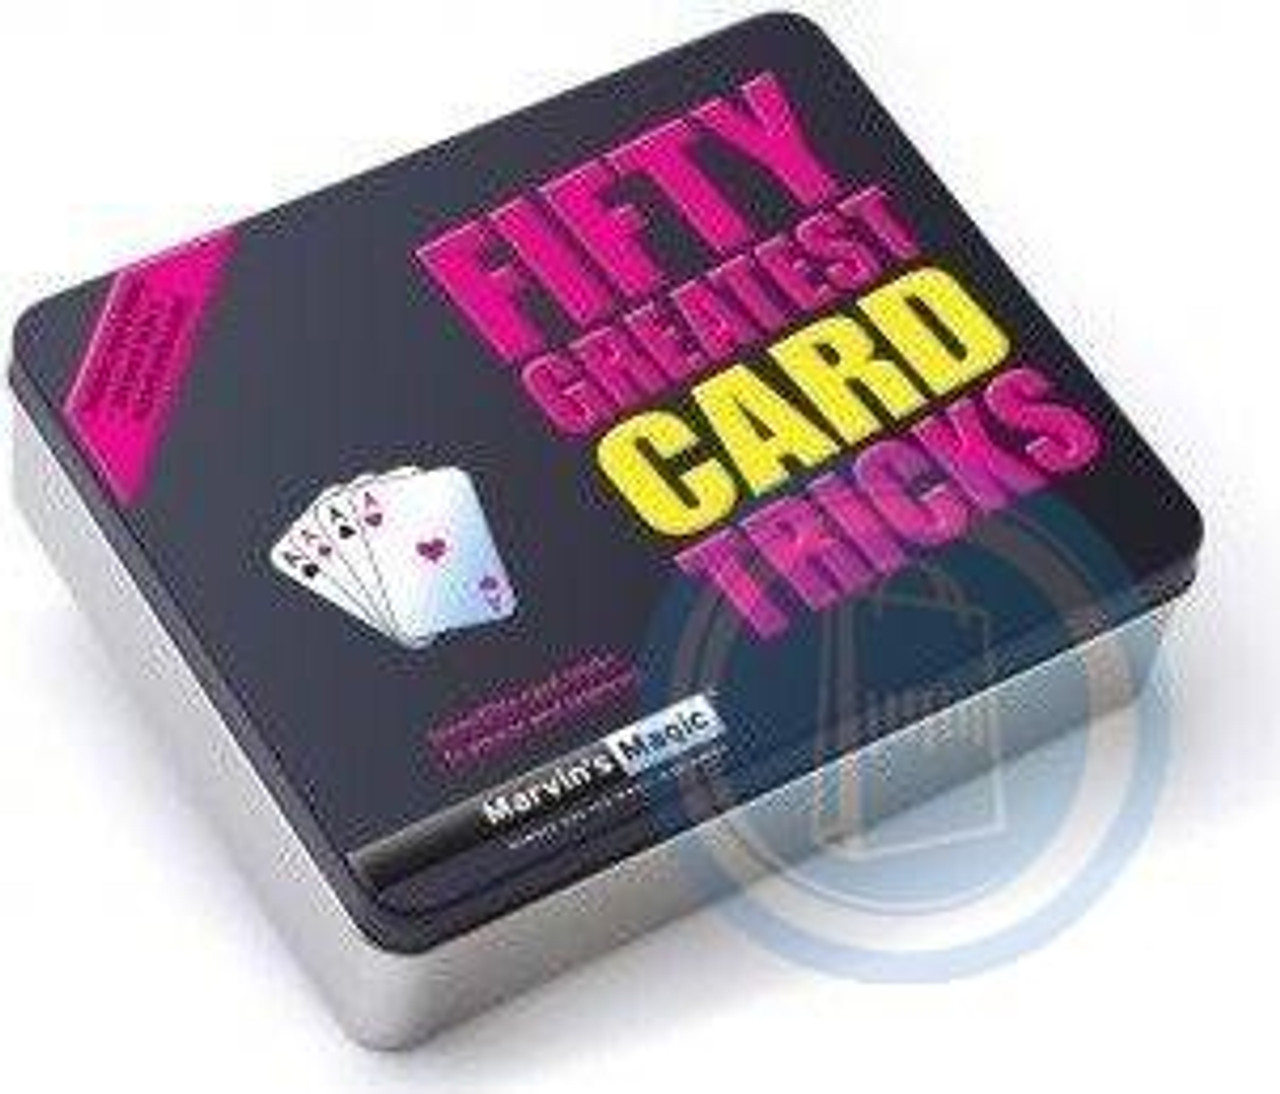 MARVIN'S MAGIC FIFTY GREATEST CARD TRICKS